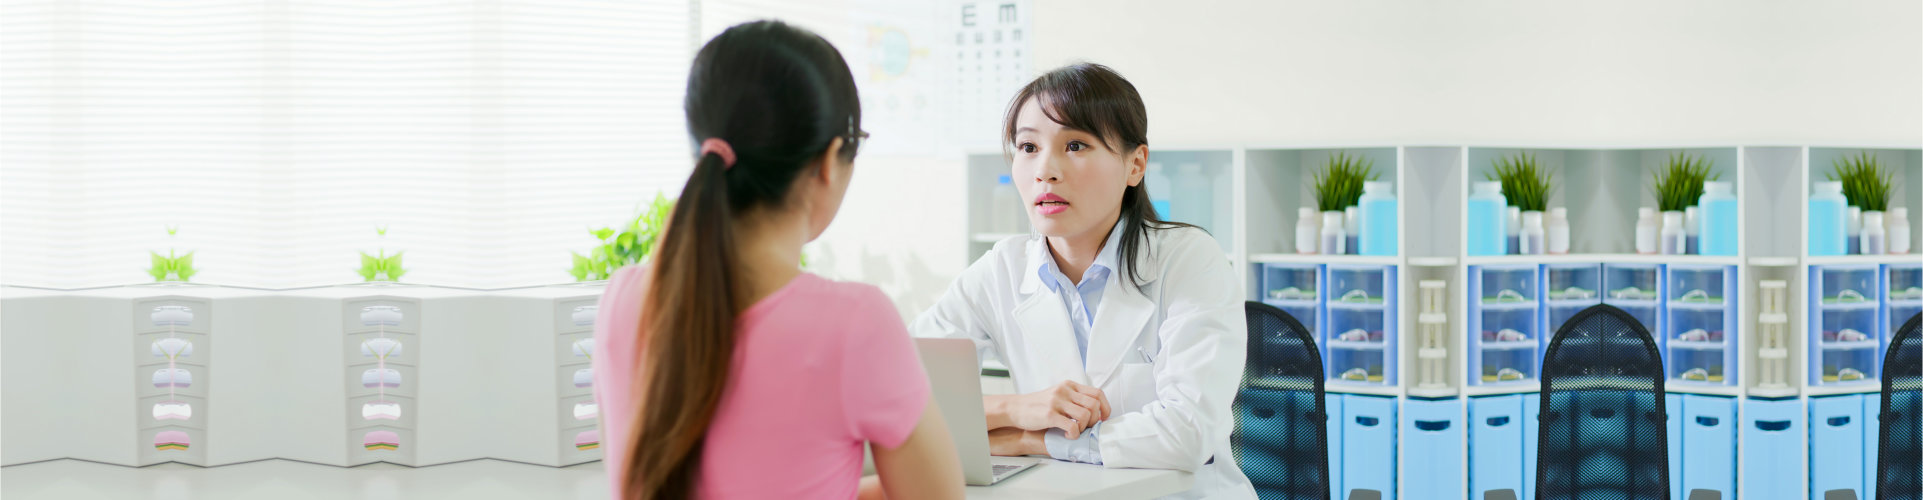 woman consults doctor